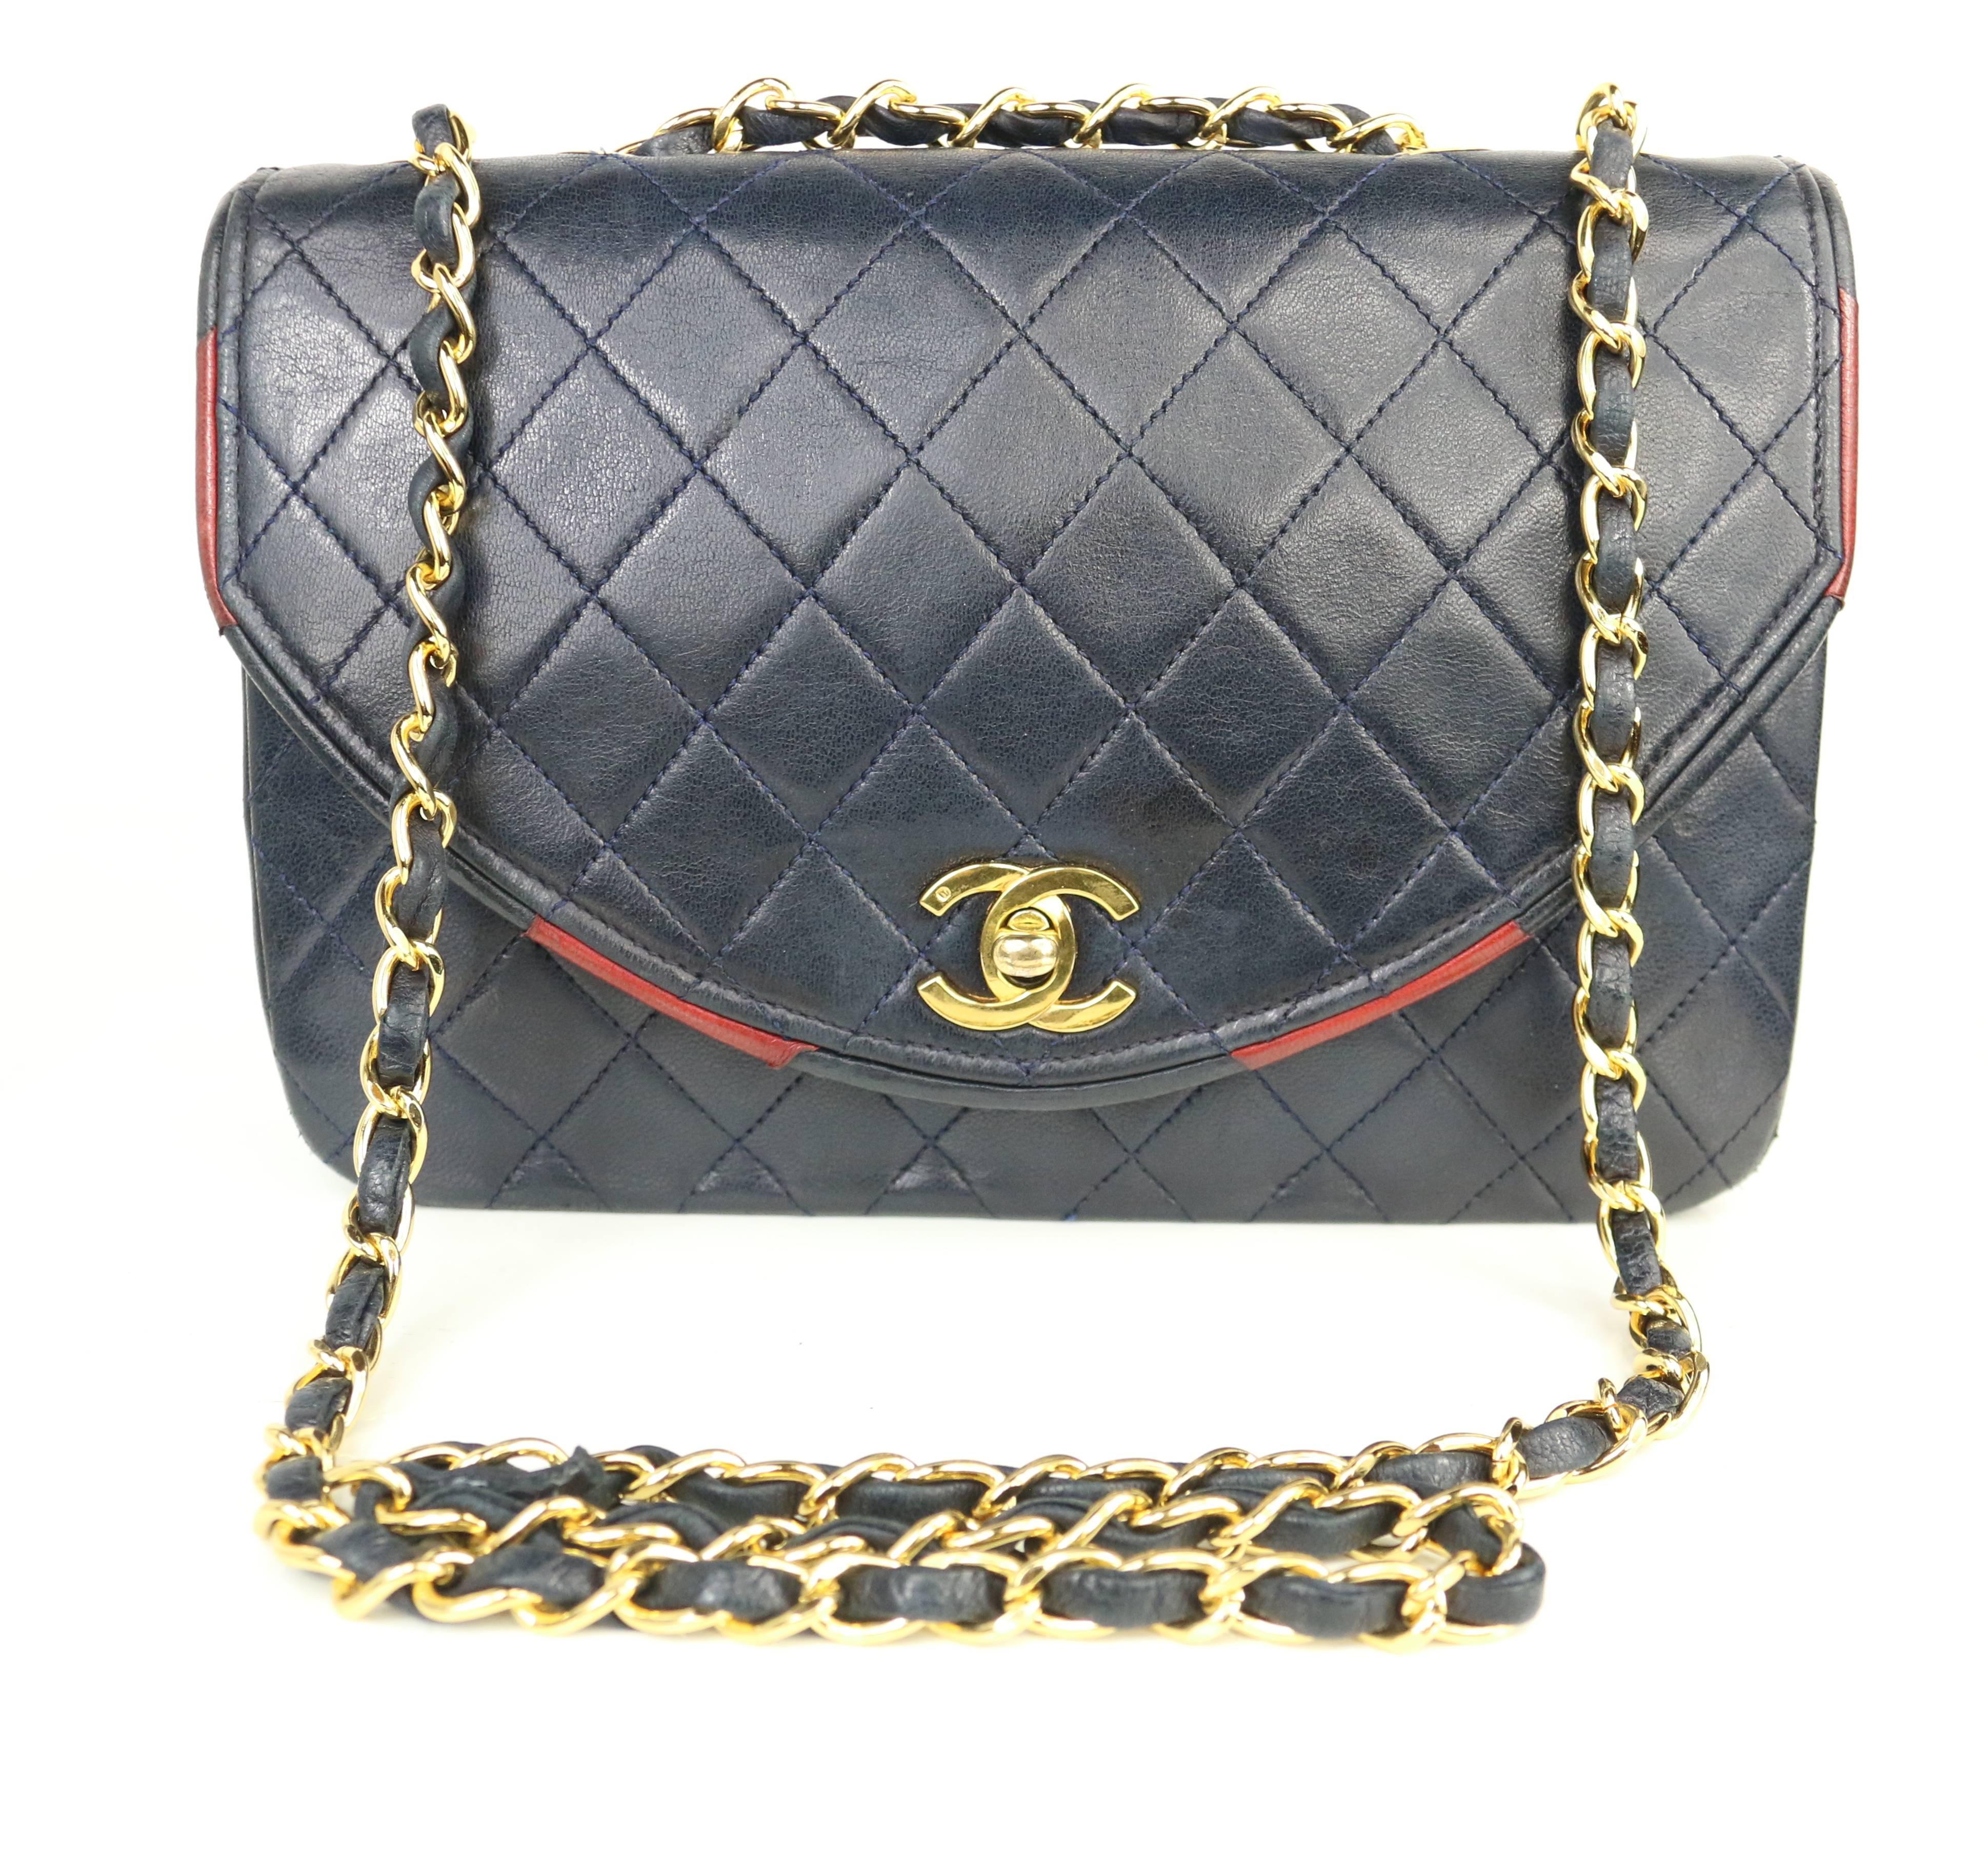 Chanel Classic Navy Quilted Lambskin Leather Red / Navy Trim Flap Shoulder Bag  9